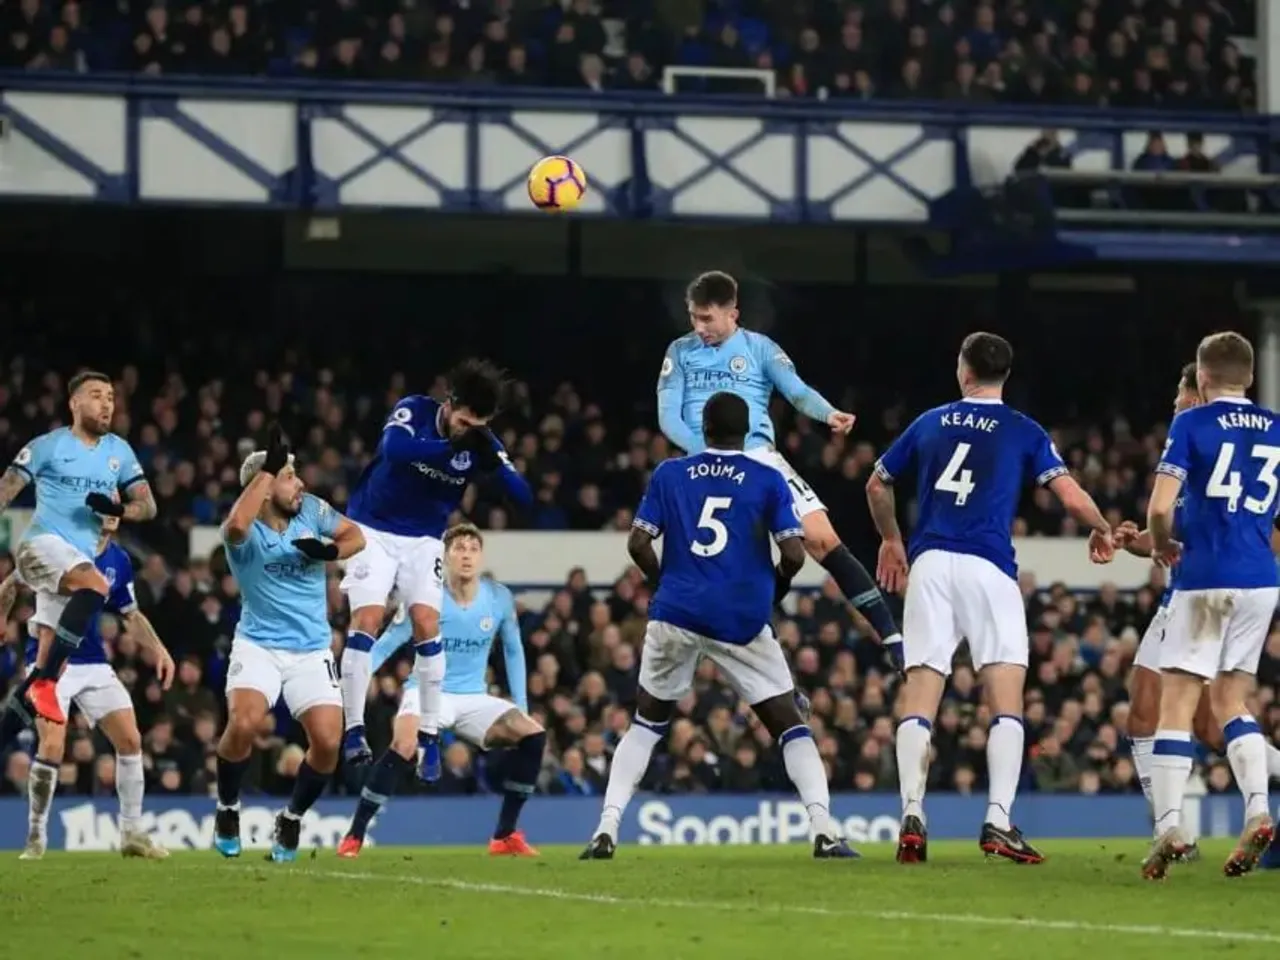 Manchester City vs Everton League 2021 Match: Fantasy Football Prediction And Match Details